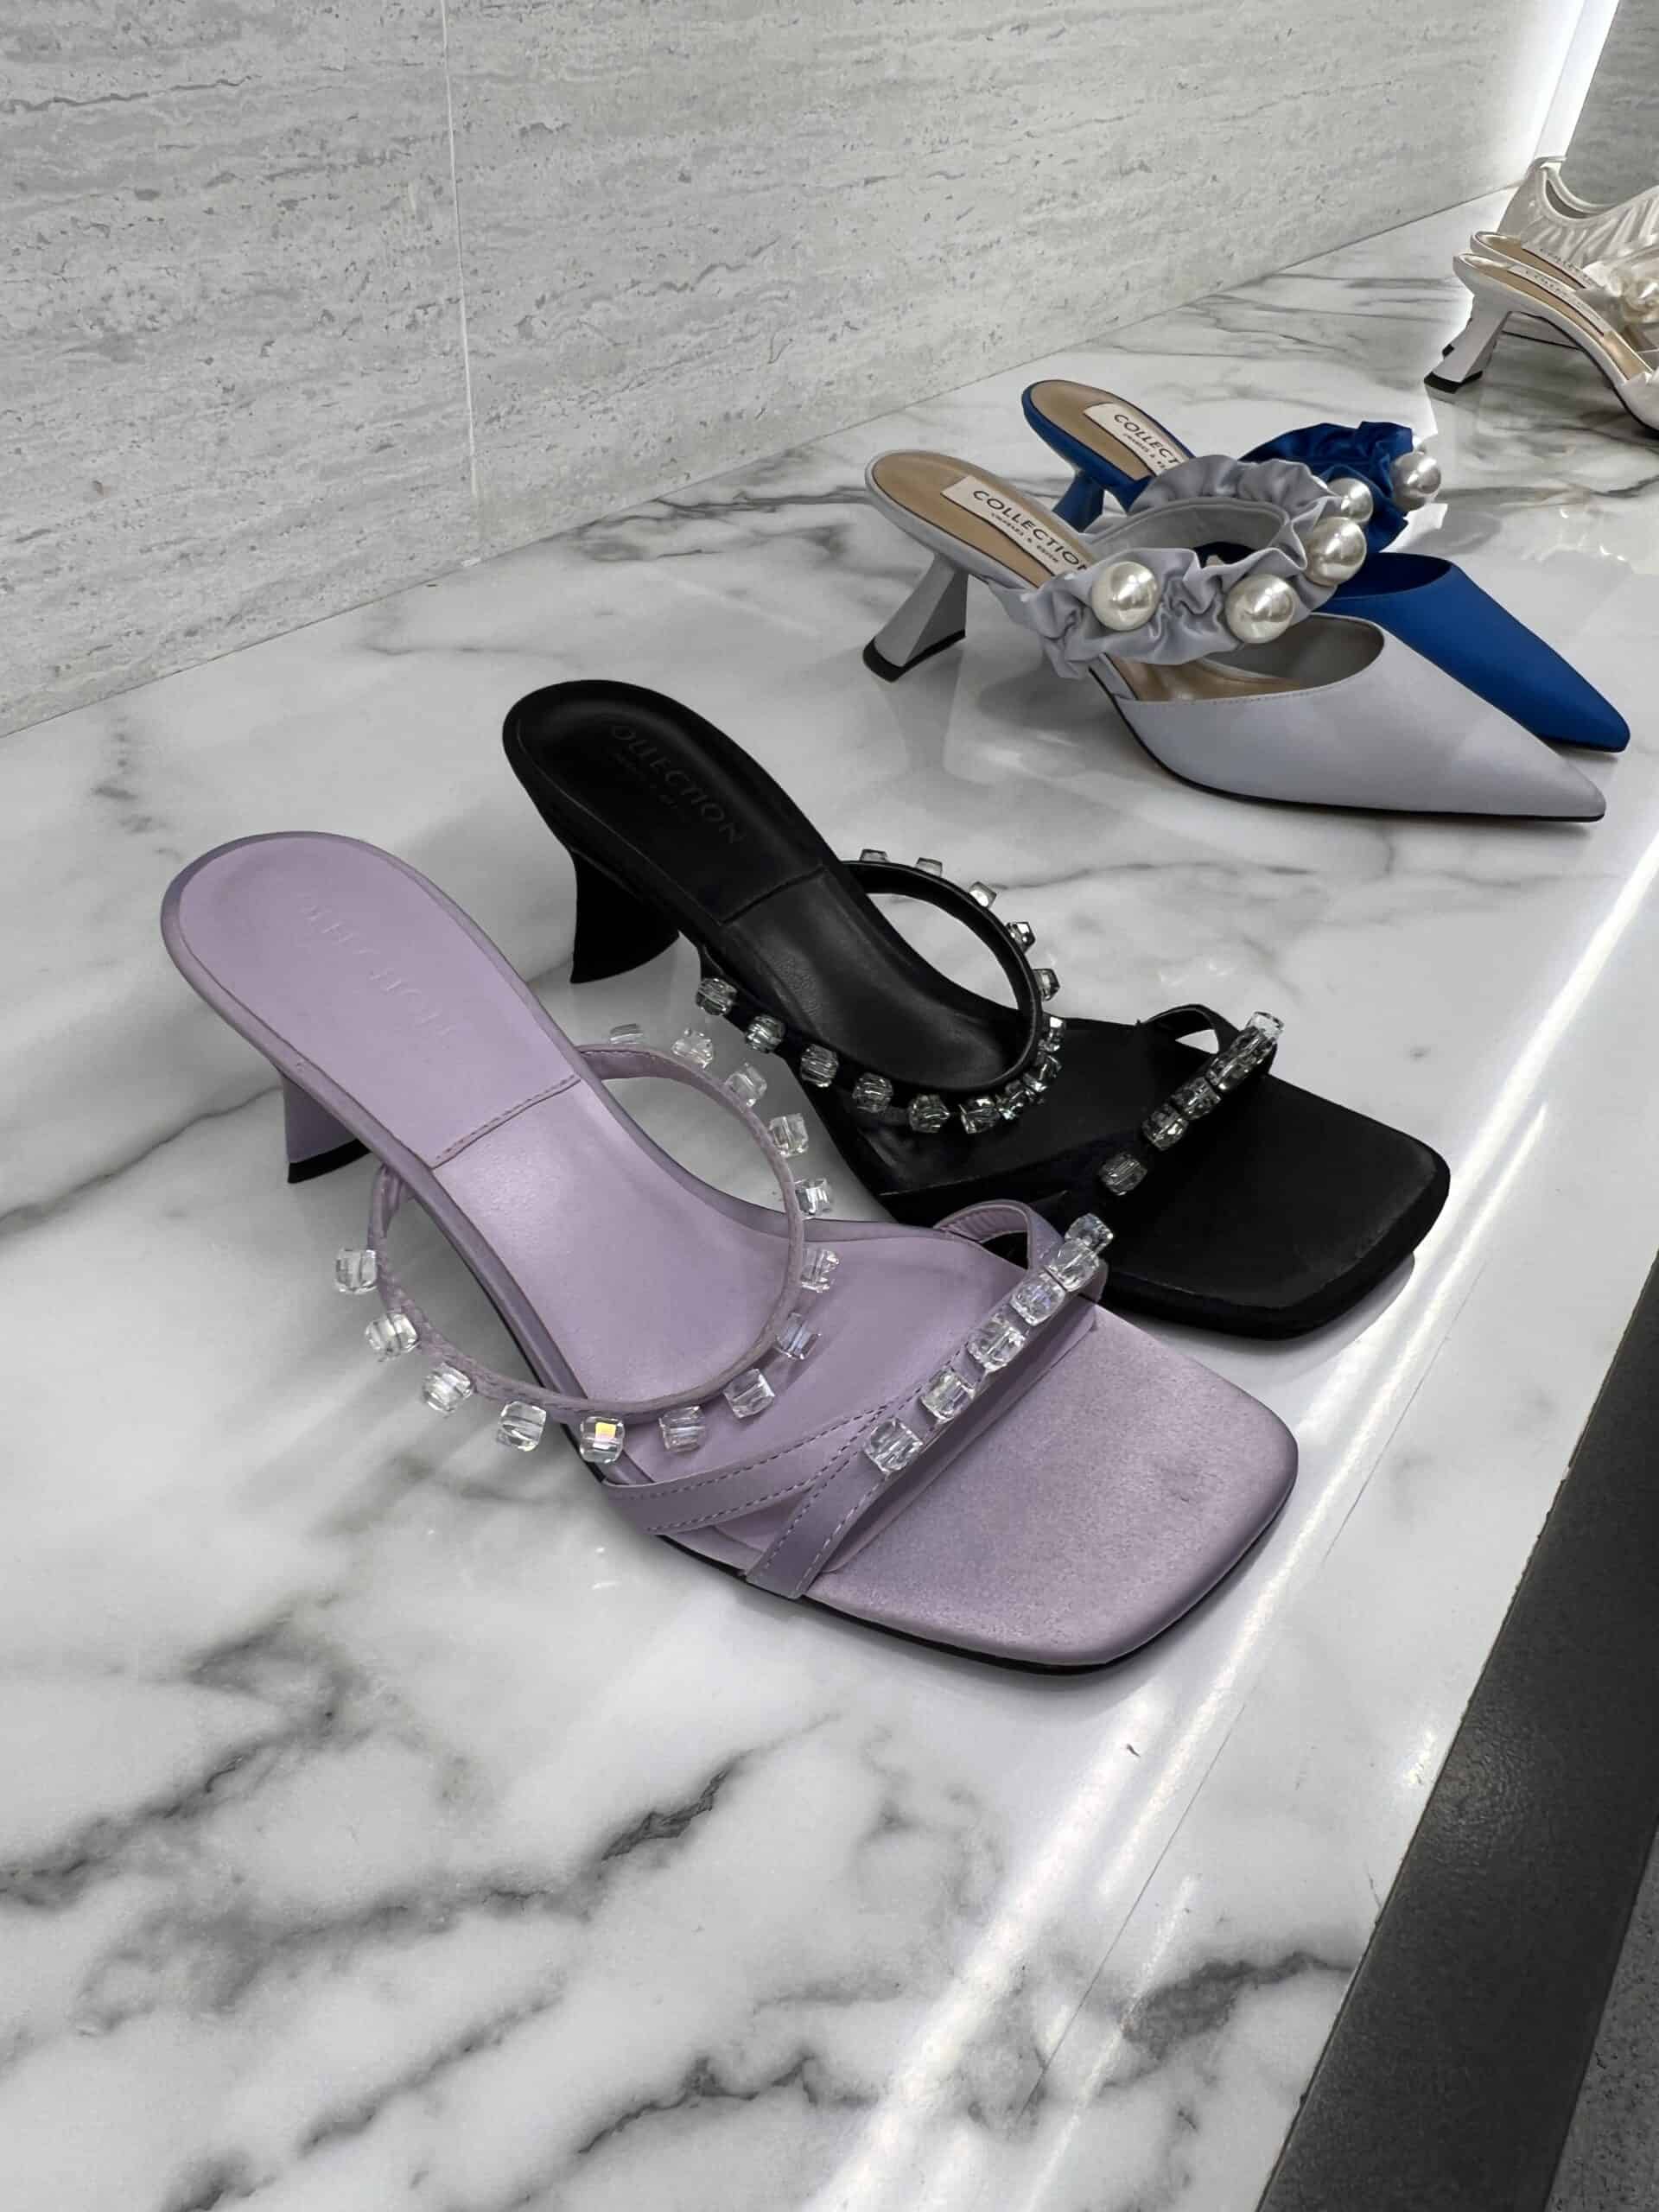 retail women ss23 sandals mule kitten strappy square satin crystals black lavender charleskeith 1